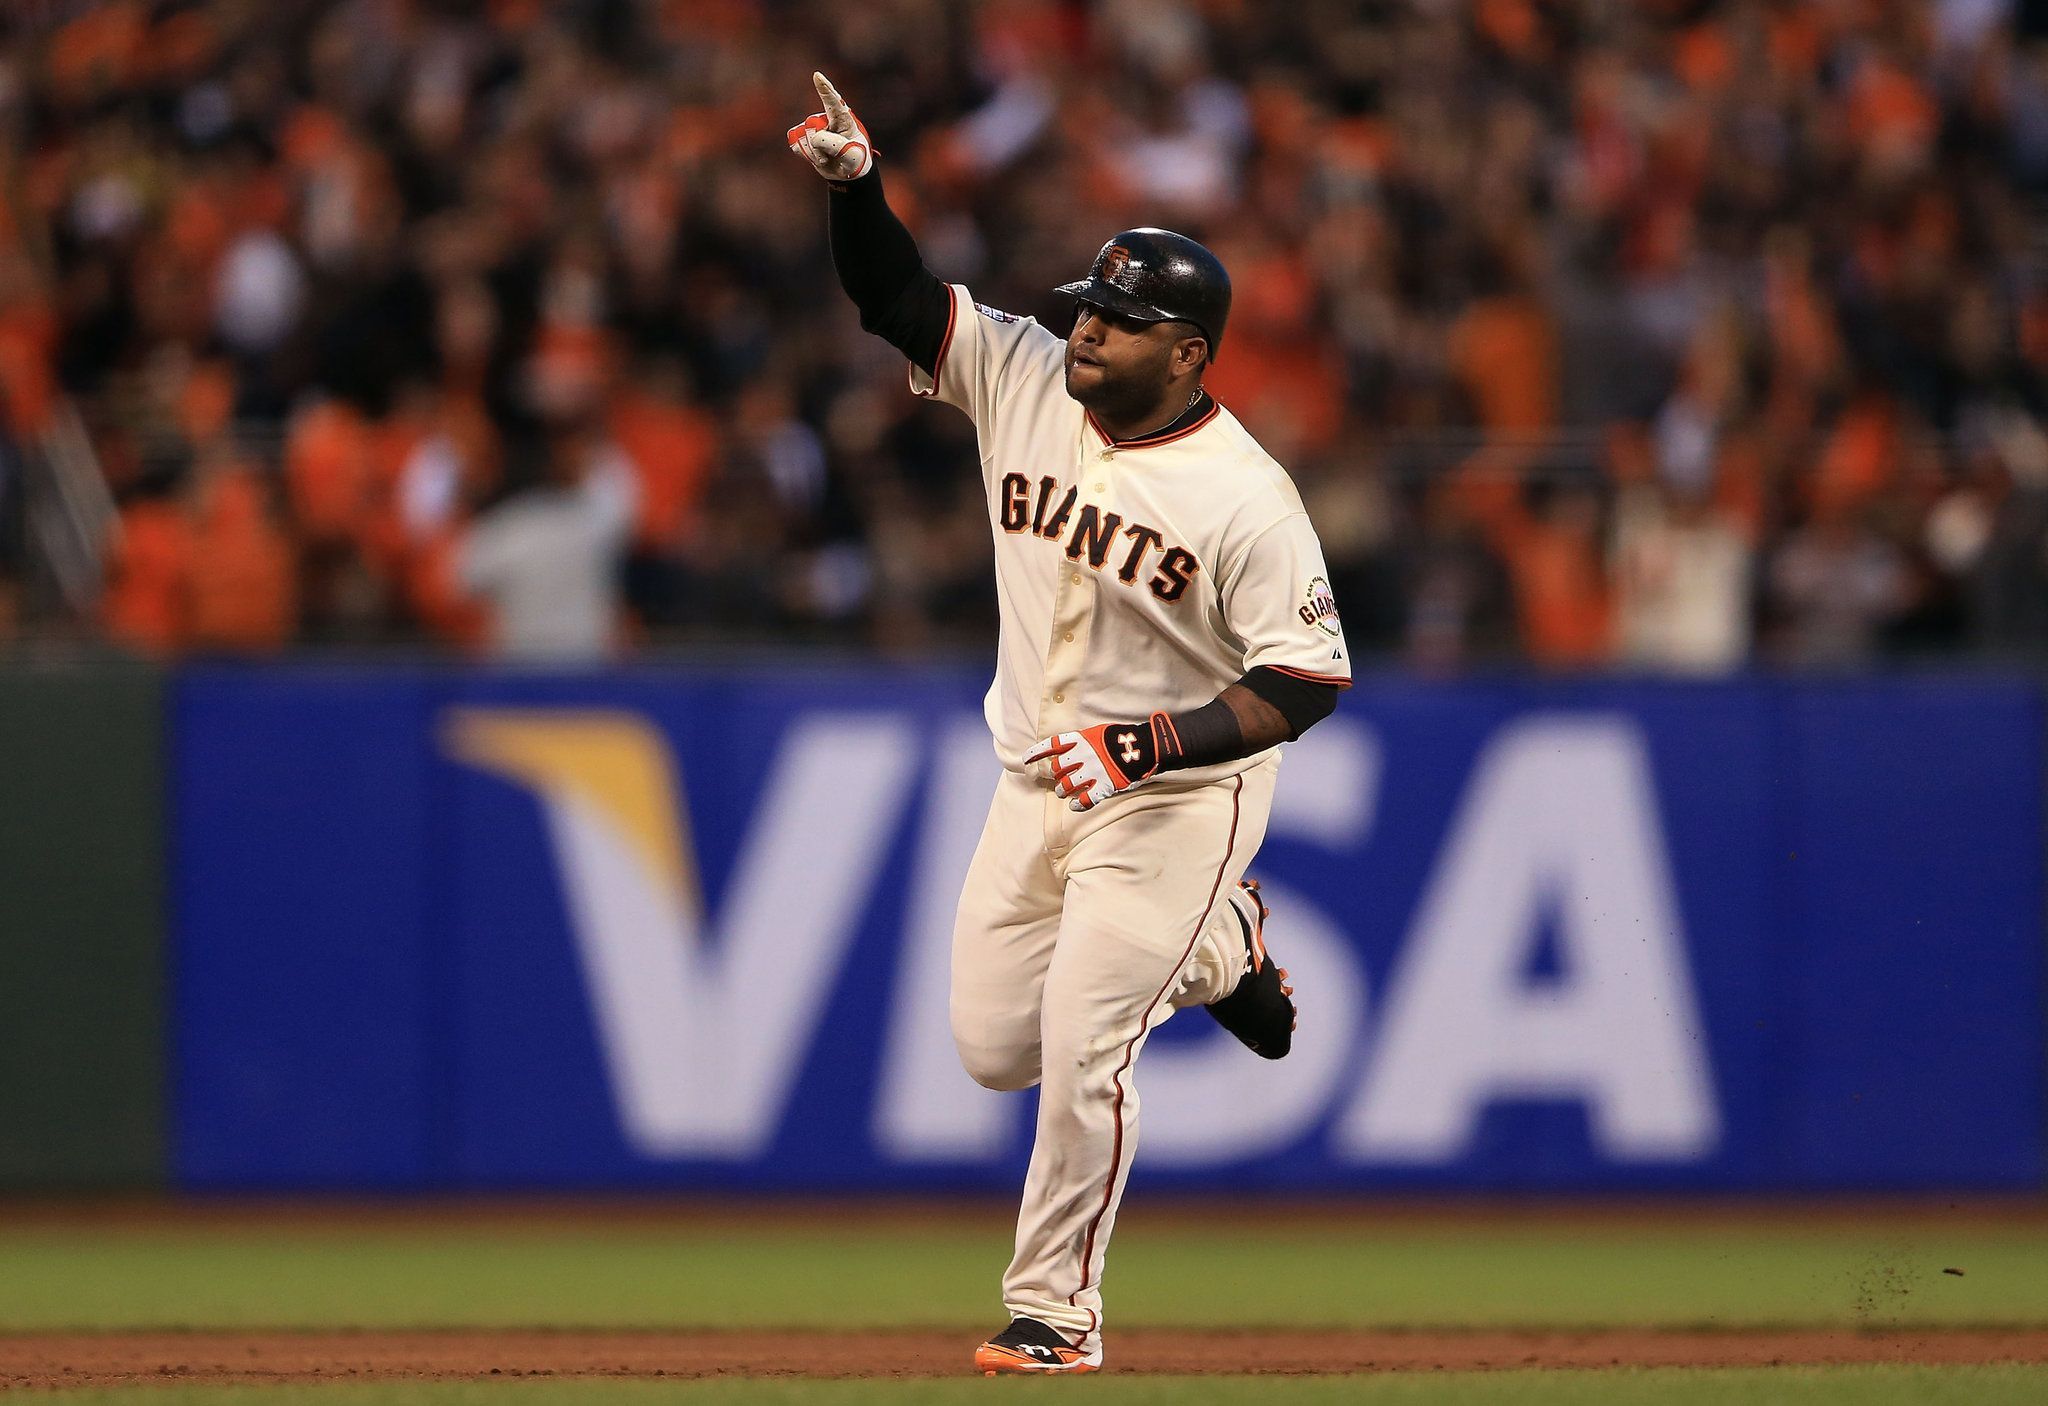 Sandovals 3 Homers Lift Giants in World Series Rout of Tigers